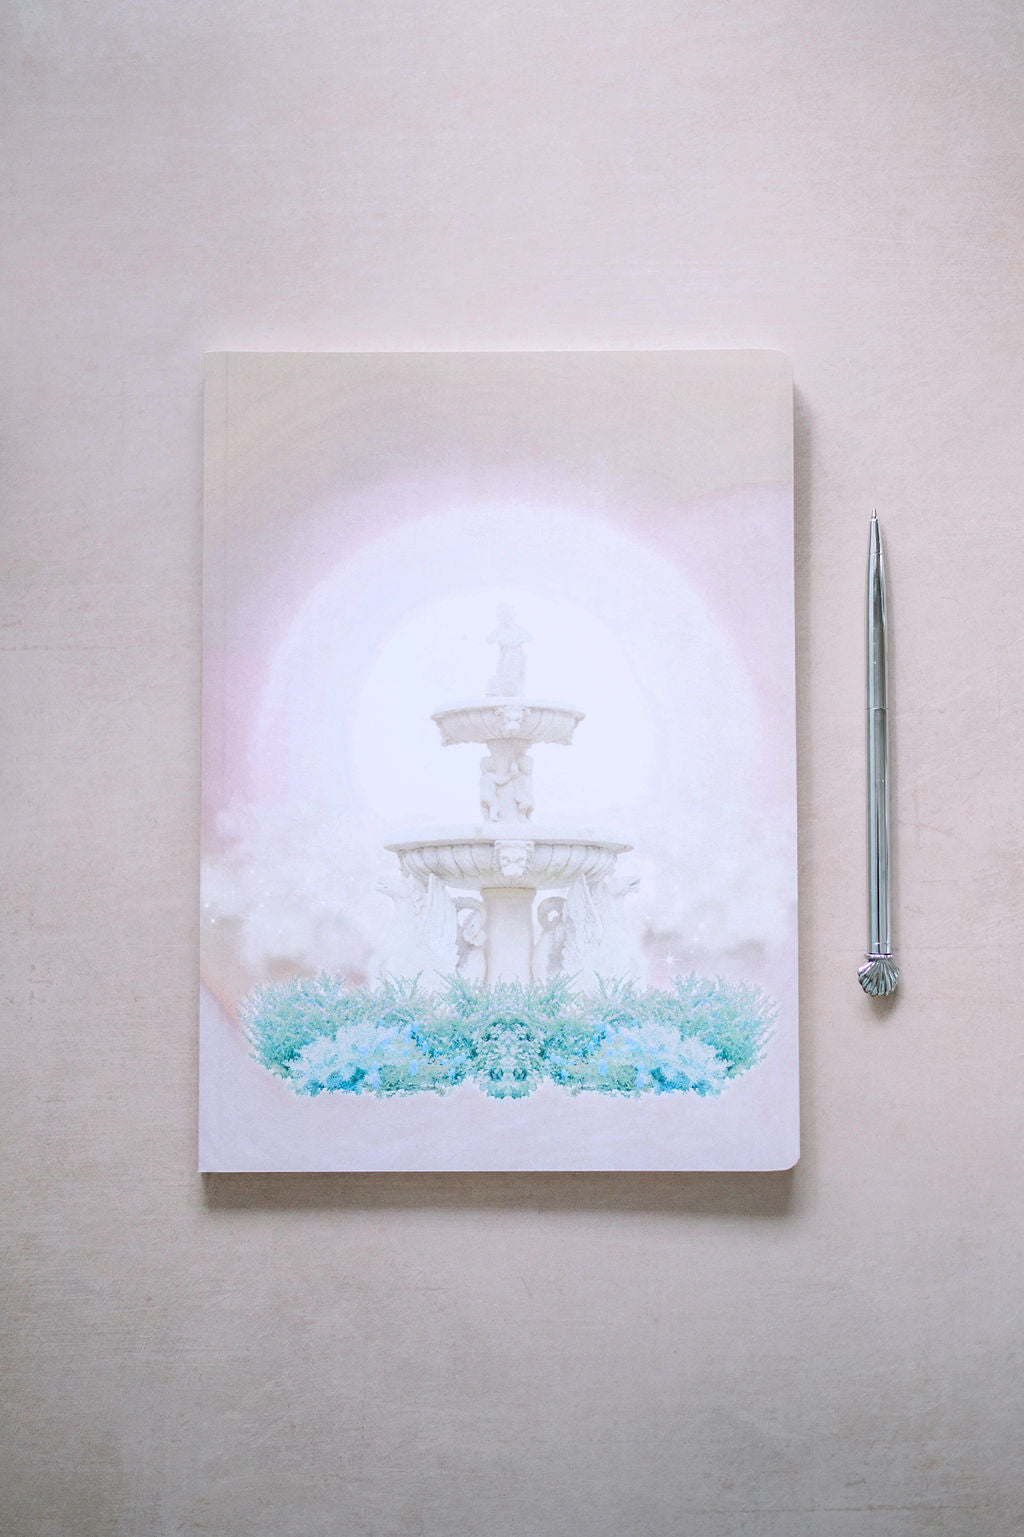 Fountain of Wealth  This journal is intended to help you notice all of the prosperity that is available to you in each moment so that you can consistently receive more of it into your life.   From the velvety-soft cover to the creamy pages to the potent cover design, this journal is the perfect place to record magical manifestations of wealth or dream up new ways for abundance to flow to you.